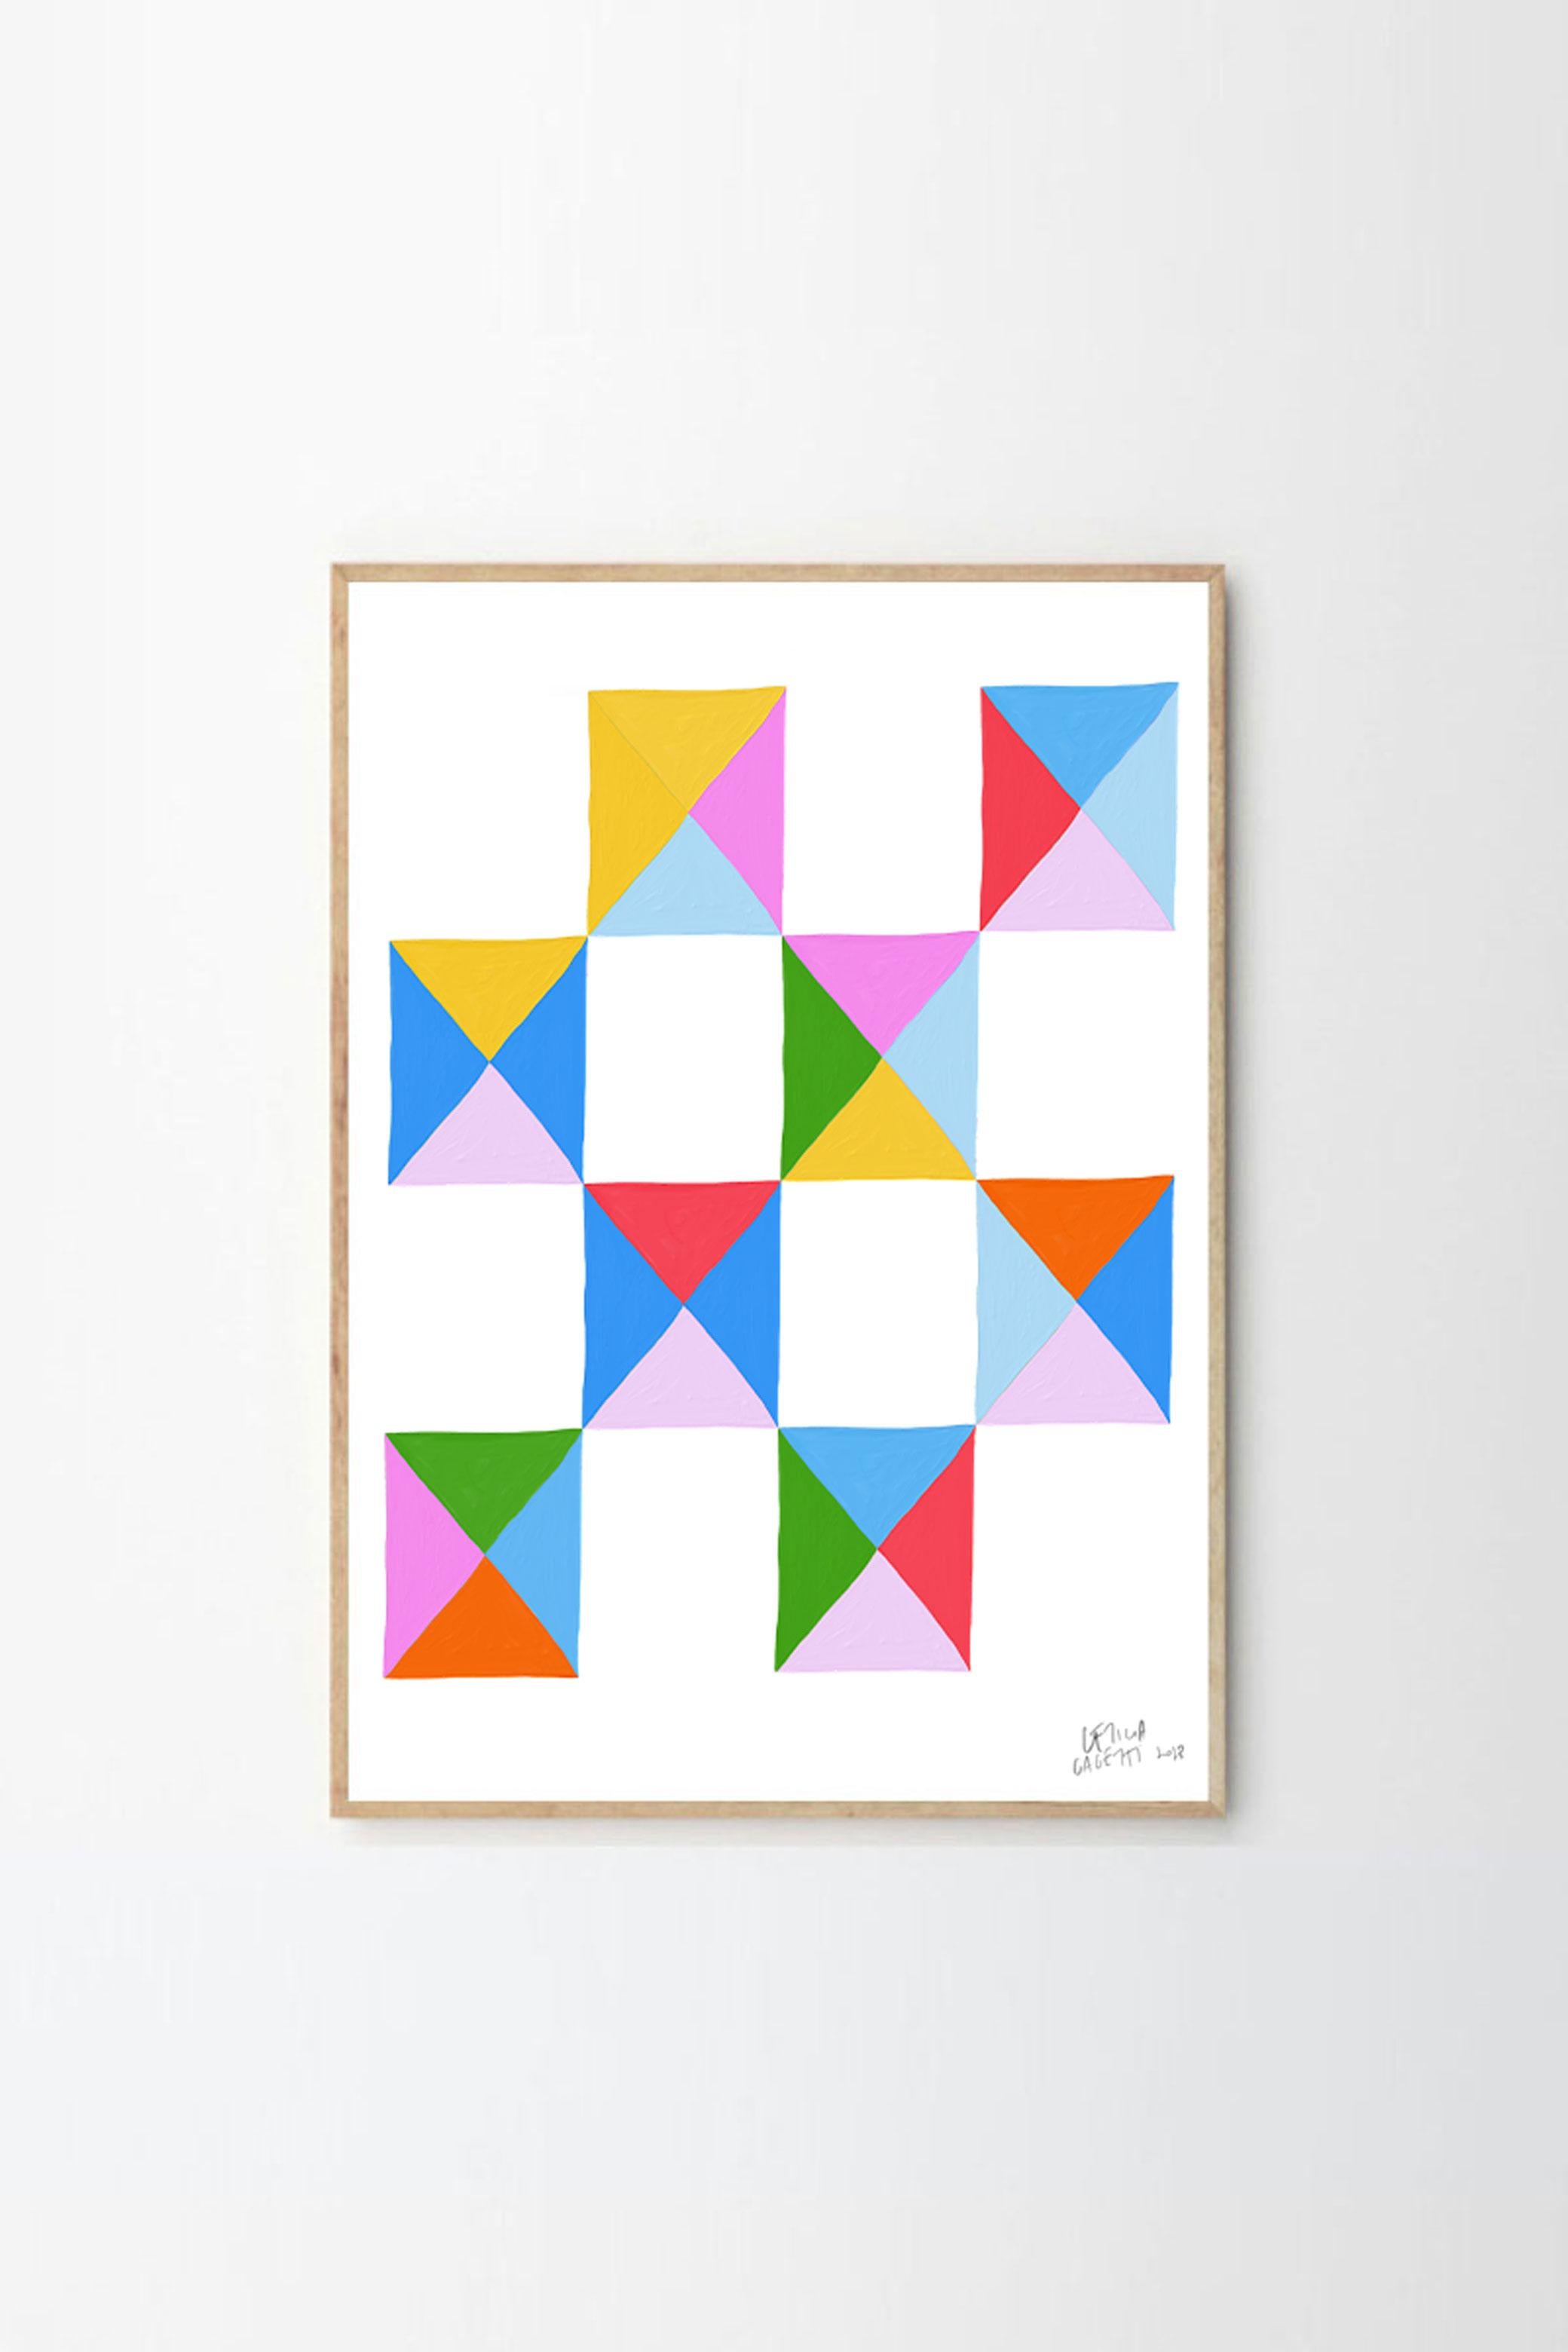 Argentine Estudios Geométricos Wall Art Print by Leticia Gagetti #03 - Multiple Sizes For Sale